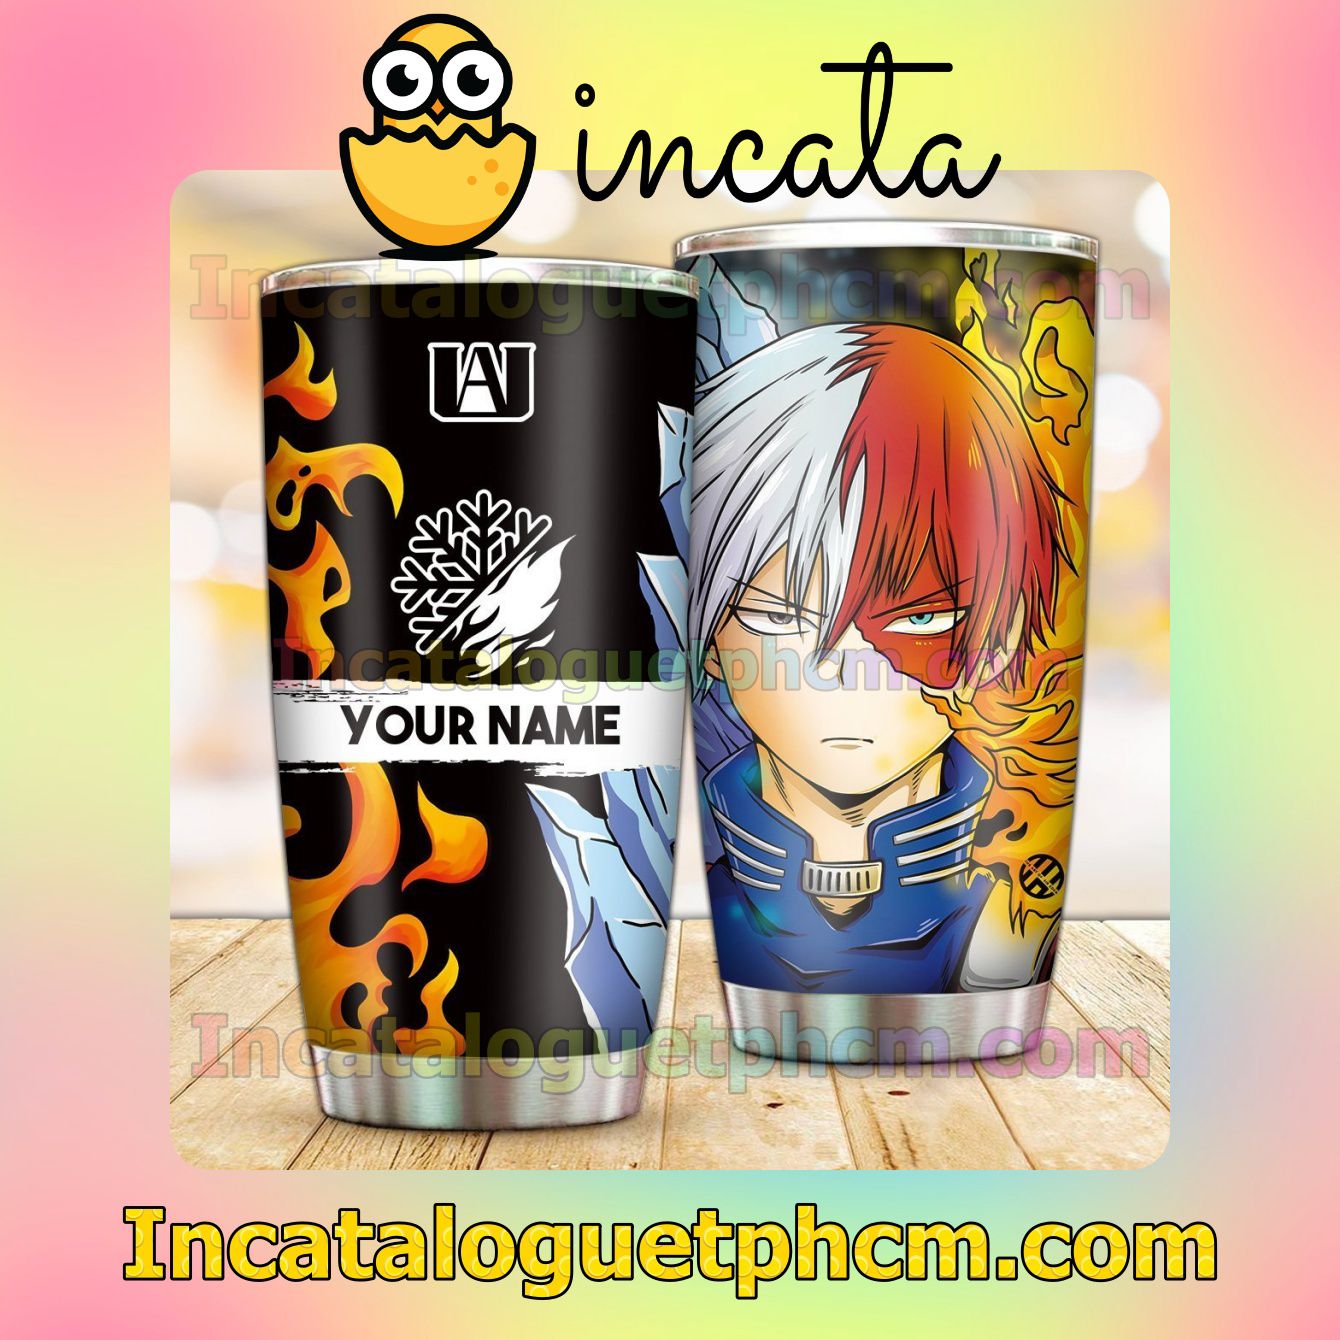 Personalized Anime Todoroki Shoto Fire Ice Quirk Tumbler Design Gift For Mom Sister